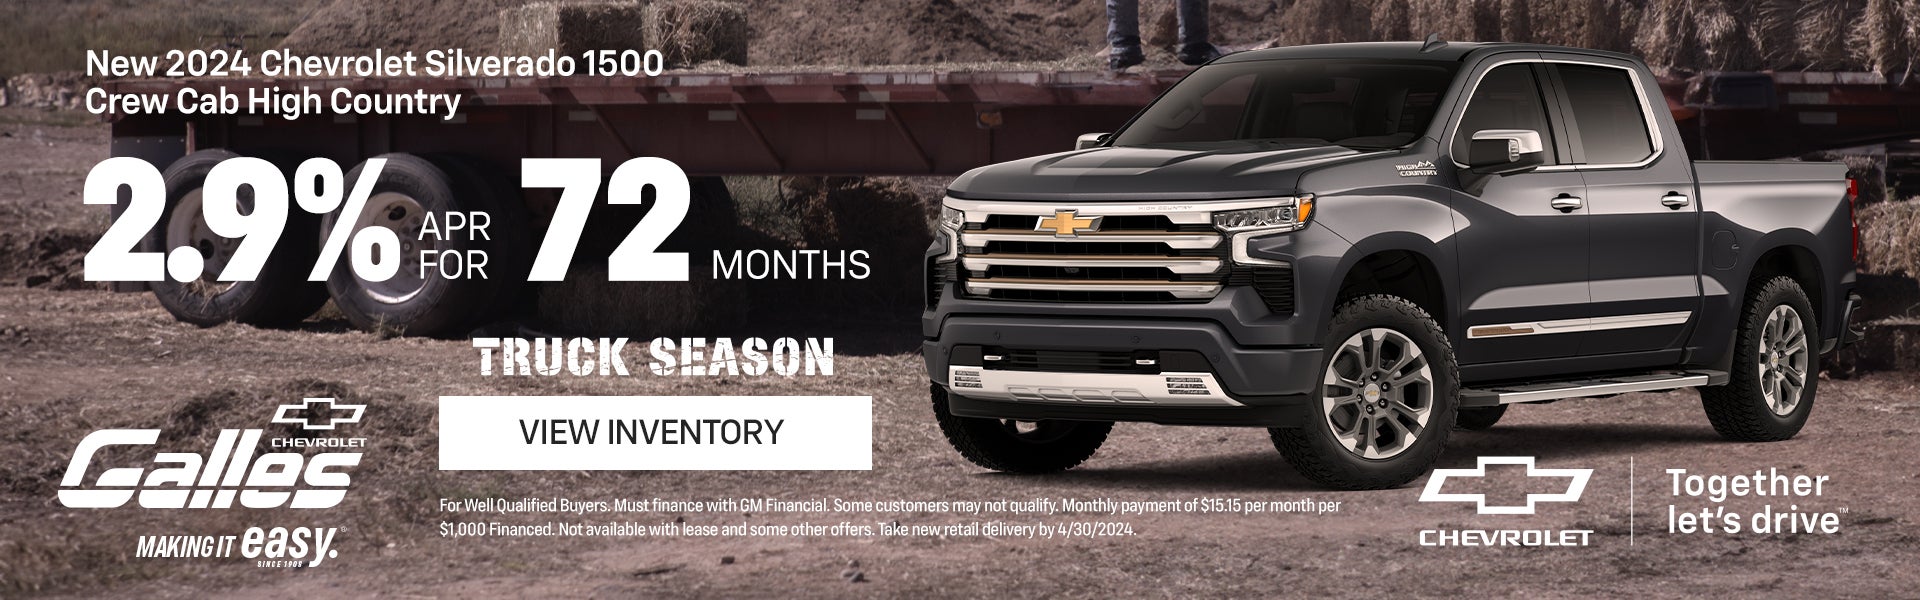 2.9% APR for 72 Months 